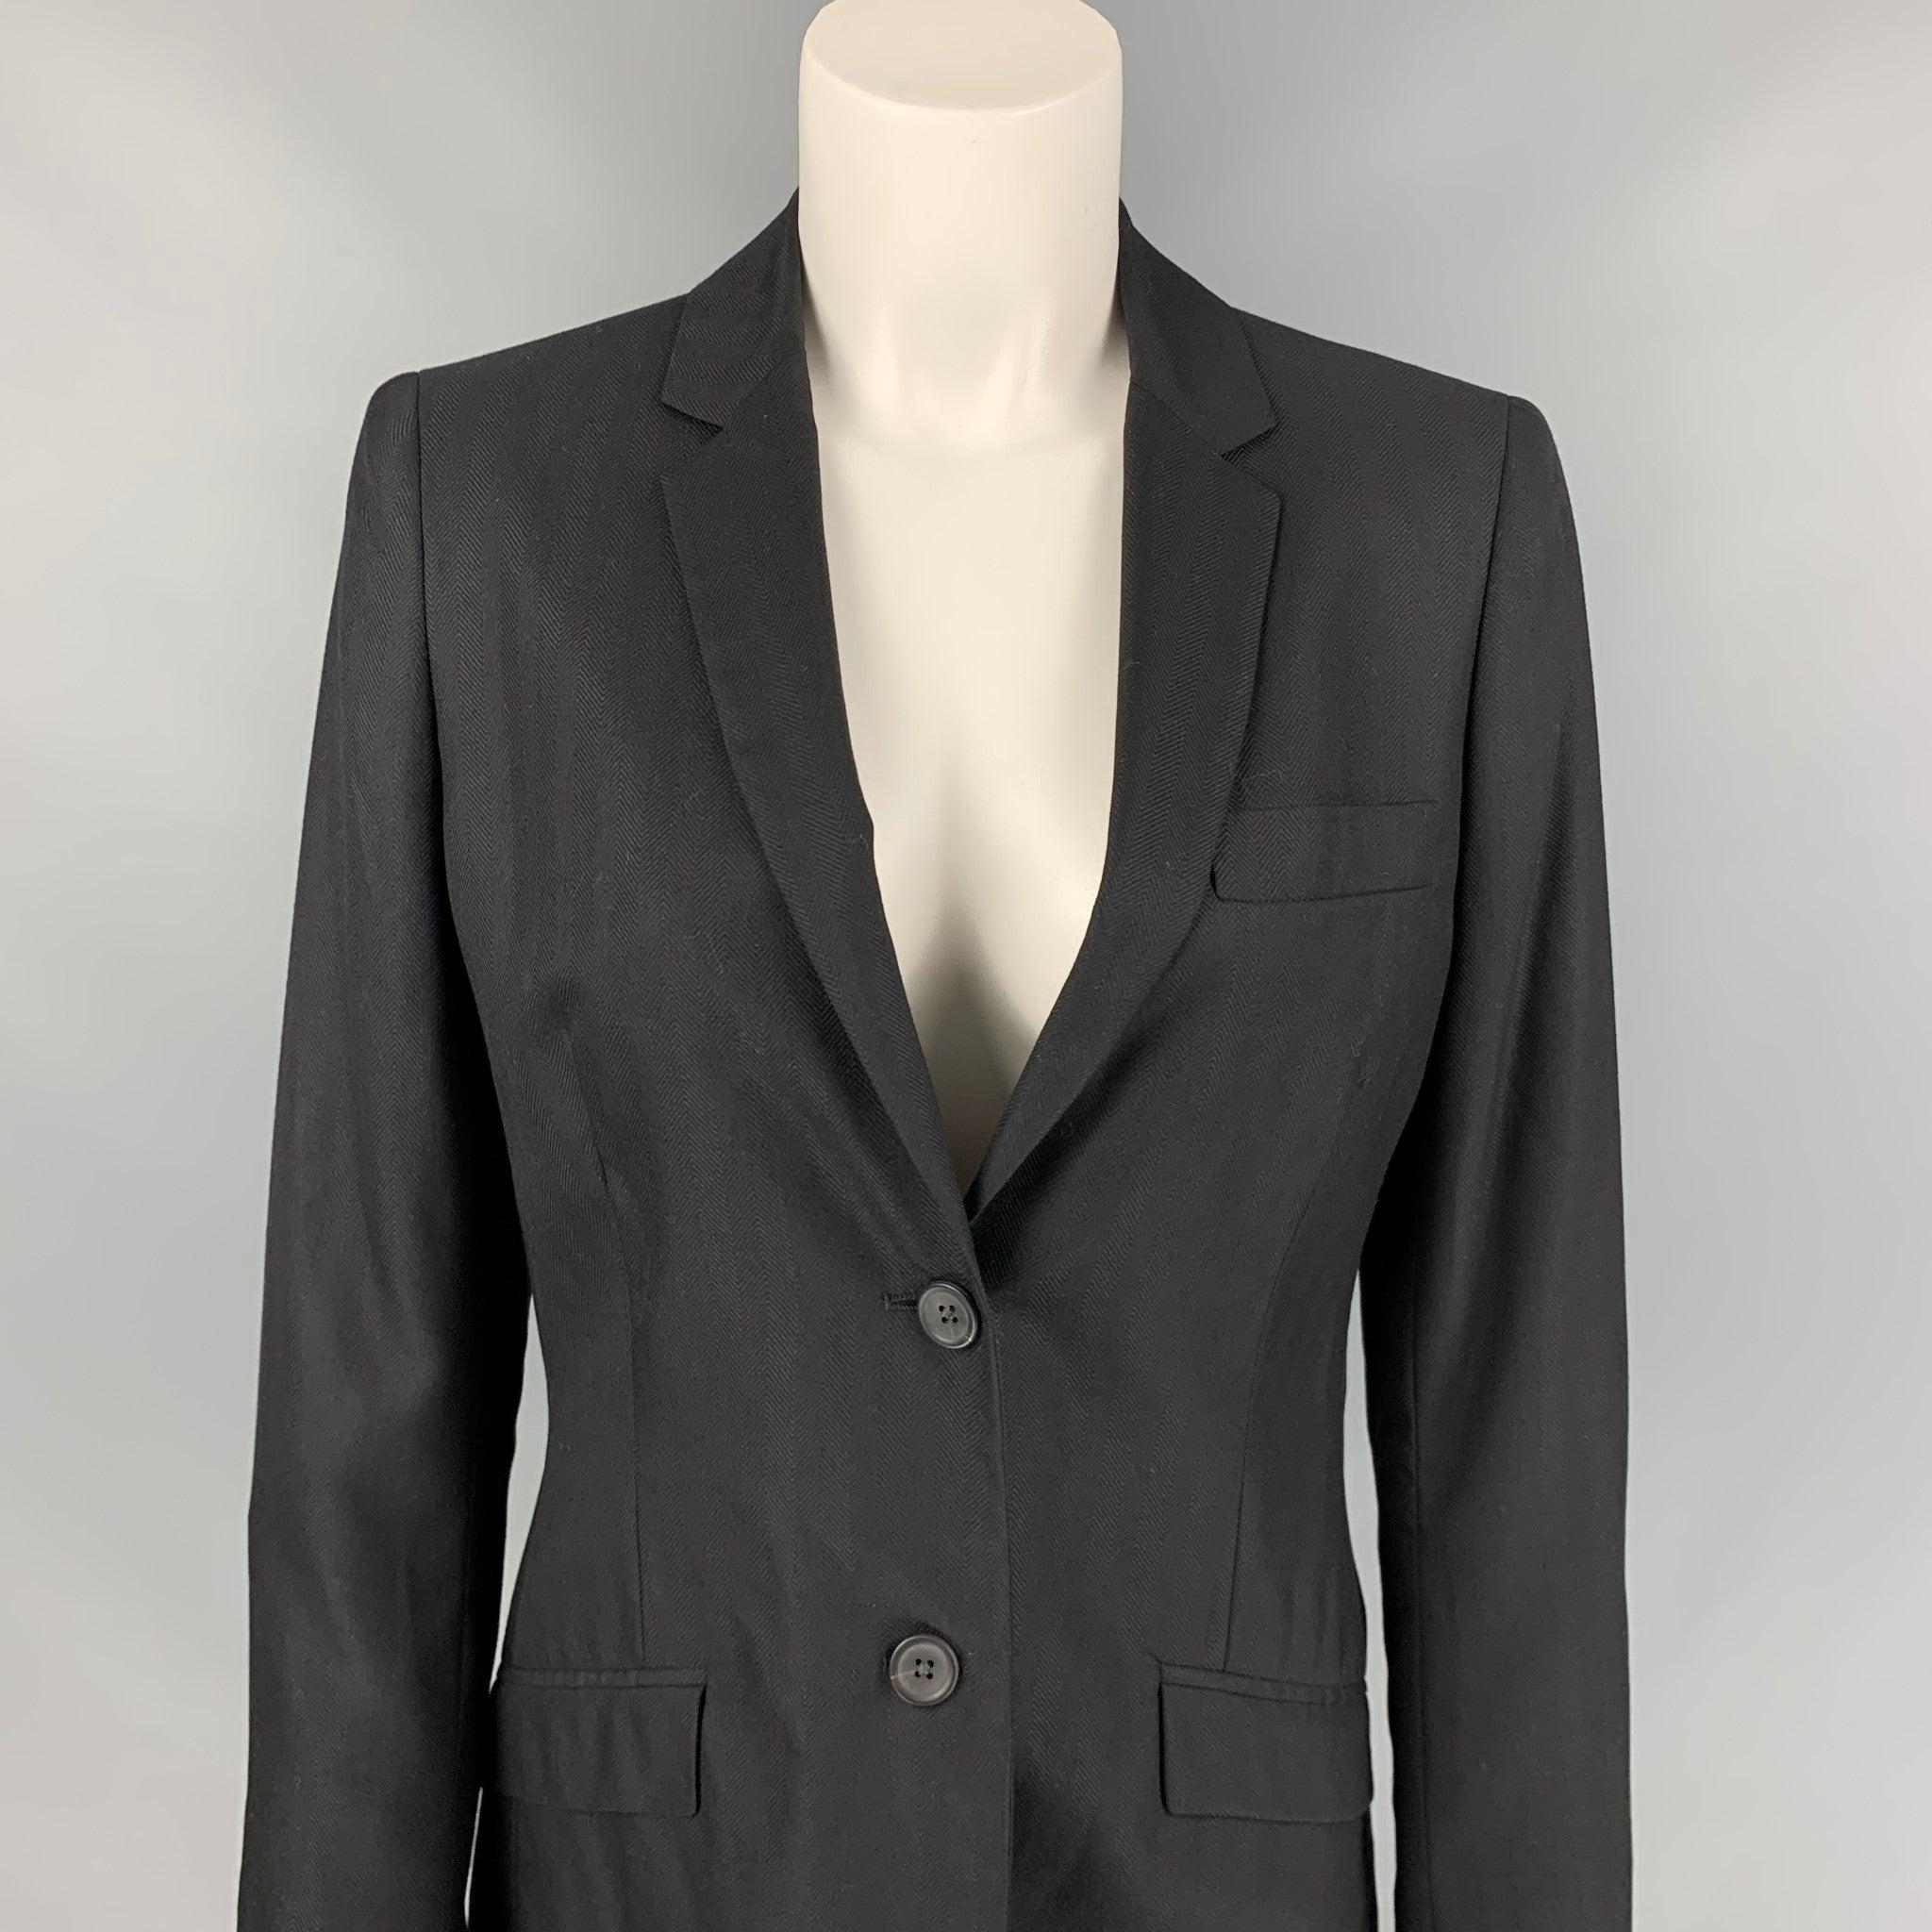 CALVIN KLEIN COLLECTION jacket blazer comes in a black cashmere / silk with a full liner featuring a notch lapel, flap pockets, and a double button closure. Made in Italy.
 Very Good
 Pre-Owned Condition. 
 

 Marked:  6/42 
 

 Measurements: 
  
